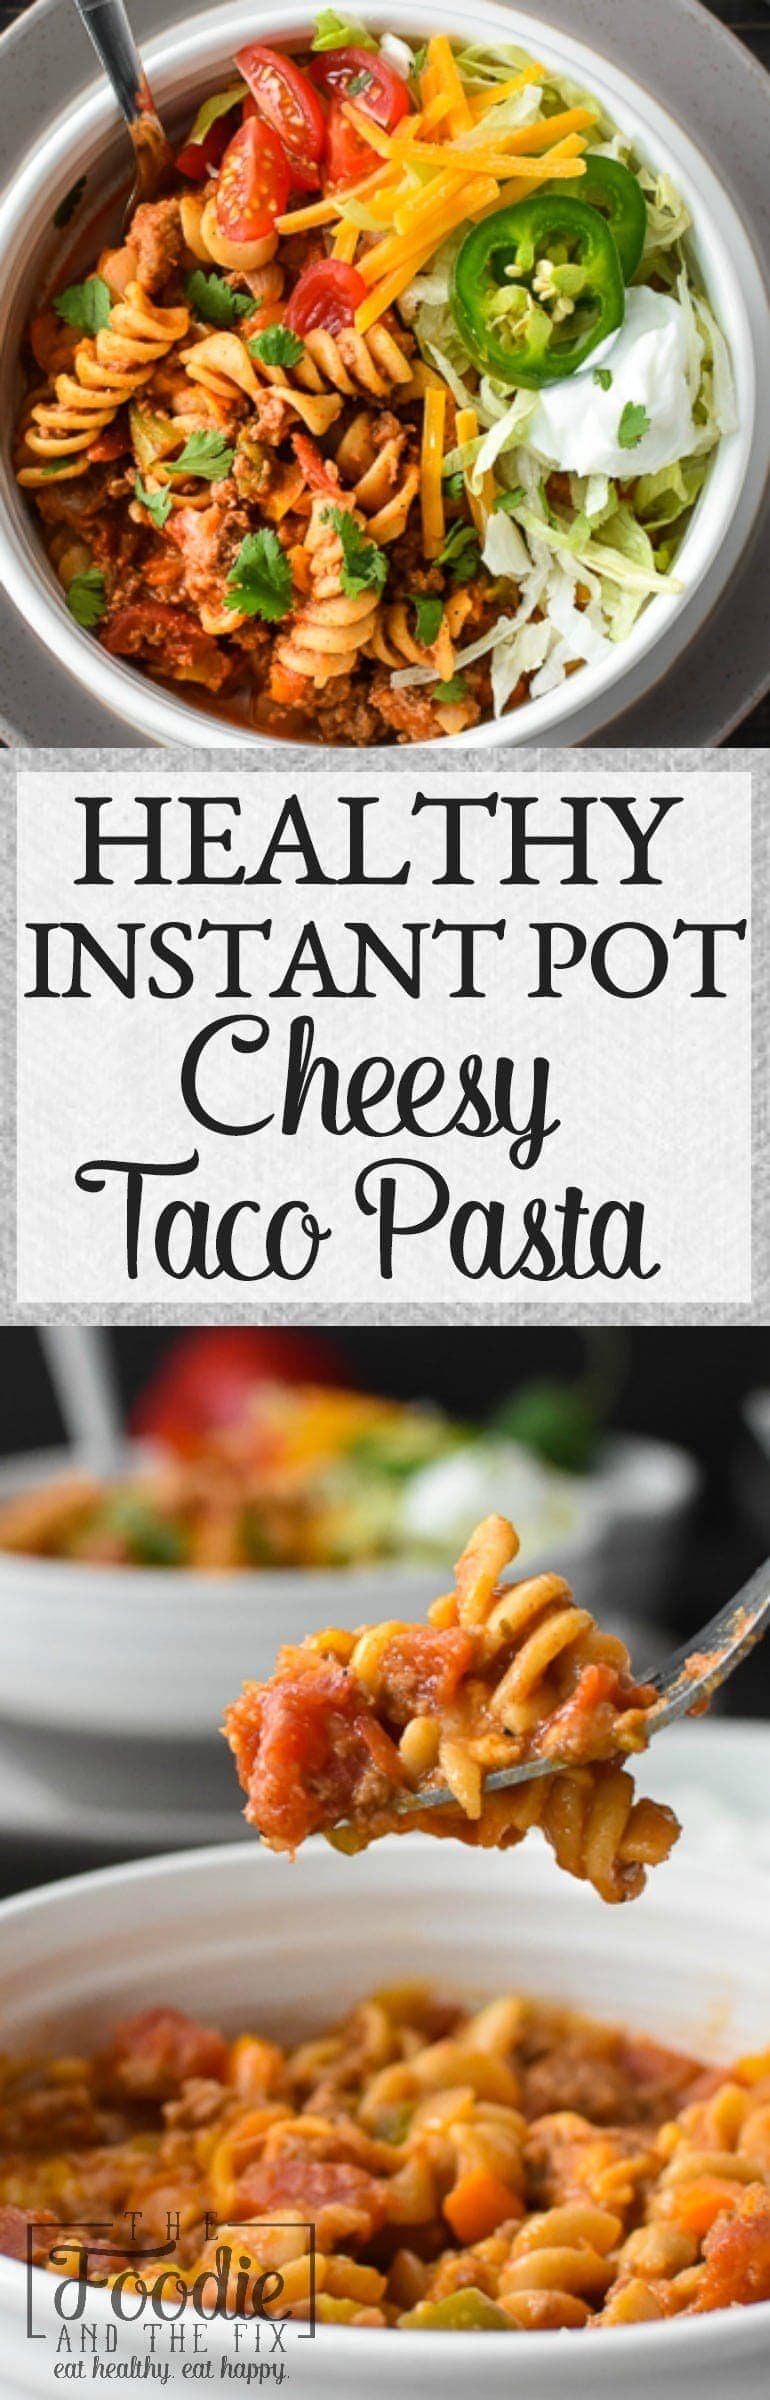 This Healthy Instant Pot Cheesy Taco Pasta is a super simple, quick and delicious dinner that the whole family will love! Kid-friendly and great for meal prepping, too! #21dayfix #instantpot #quick #easy #kidfriendly #mealprep #healthy #comfortfood #dinner #lunch